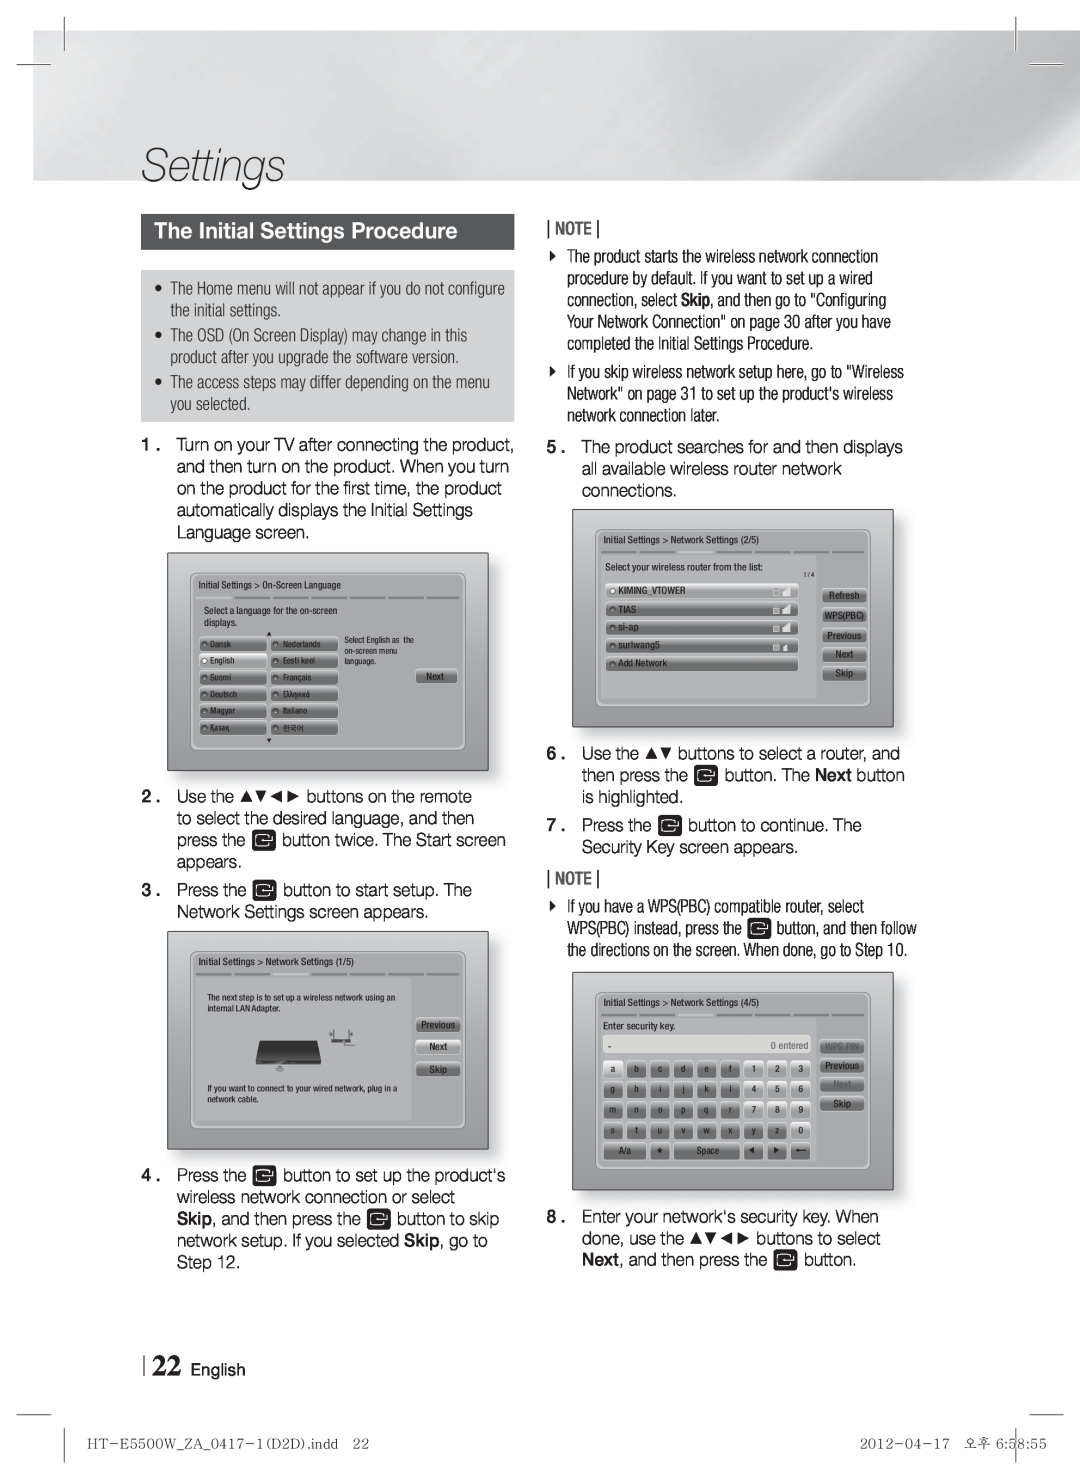 Samsung HT-E550 user manual The Initial Settings Procedure, Note 